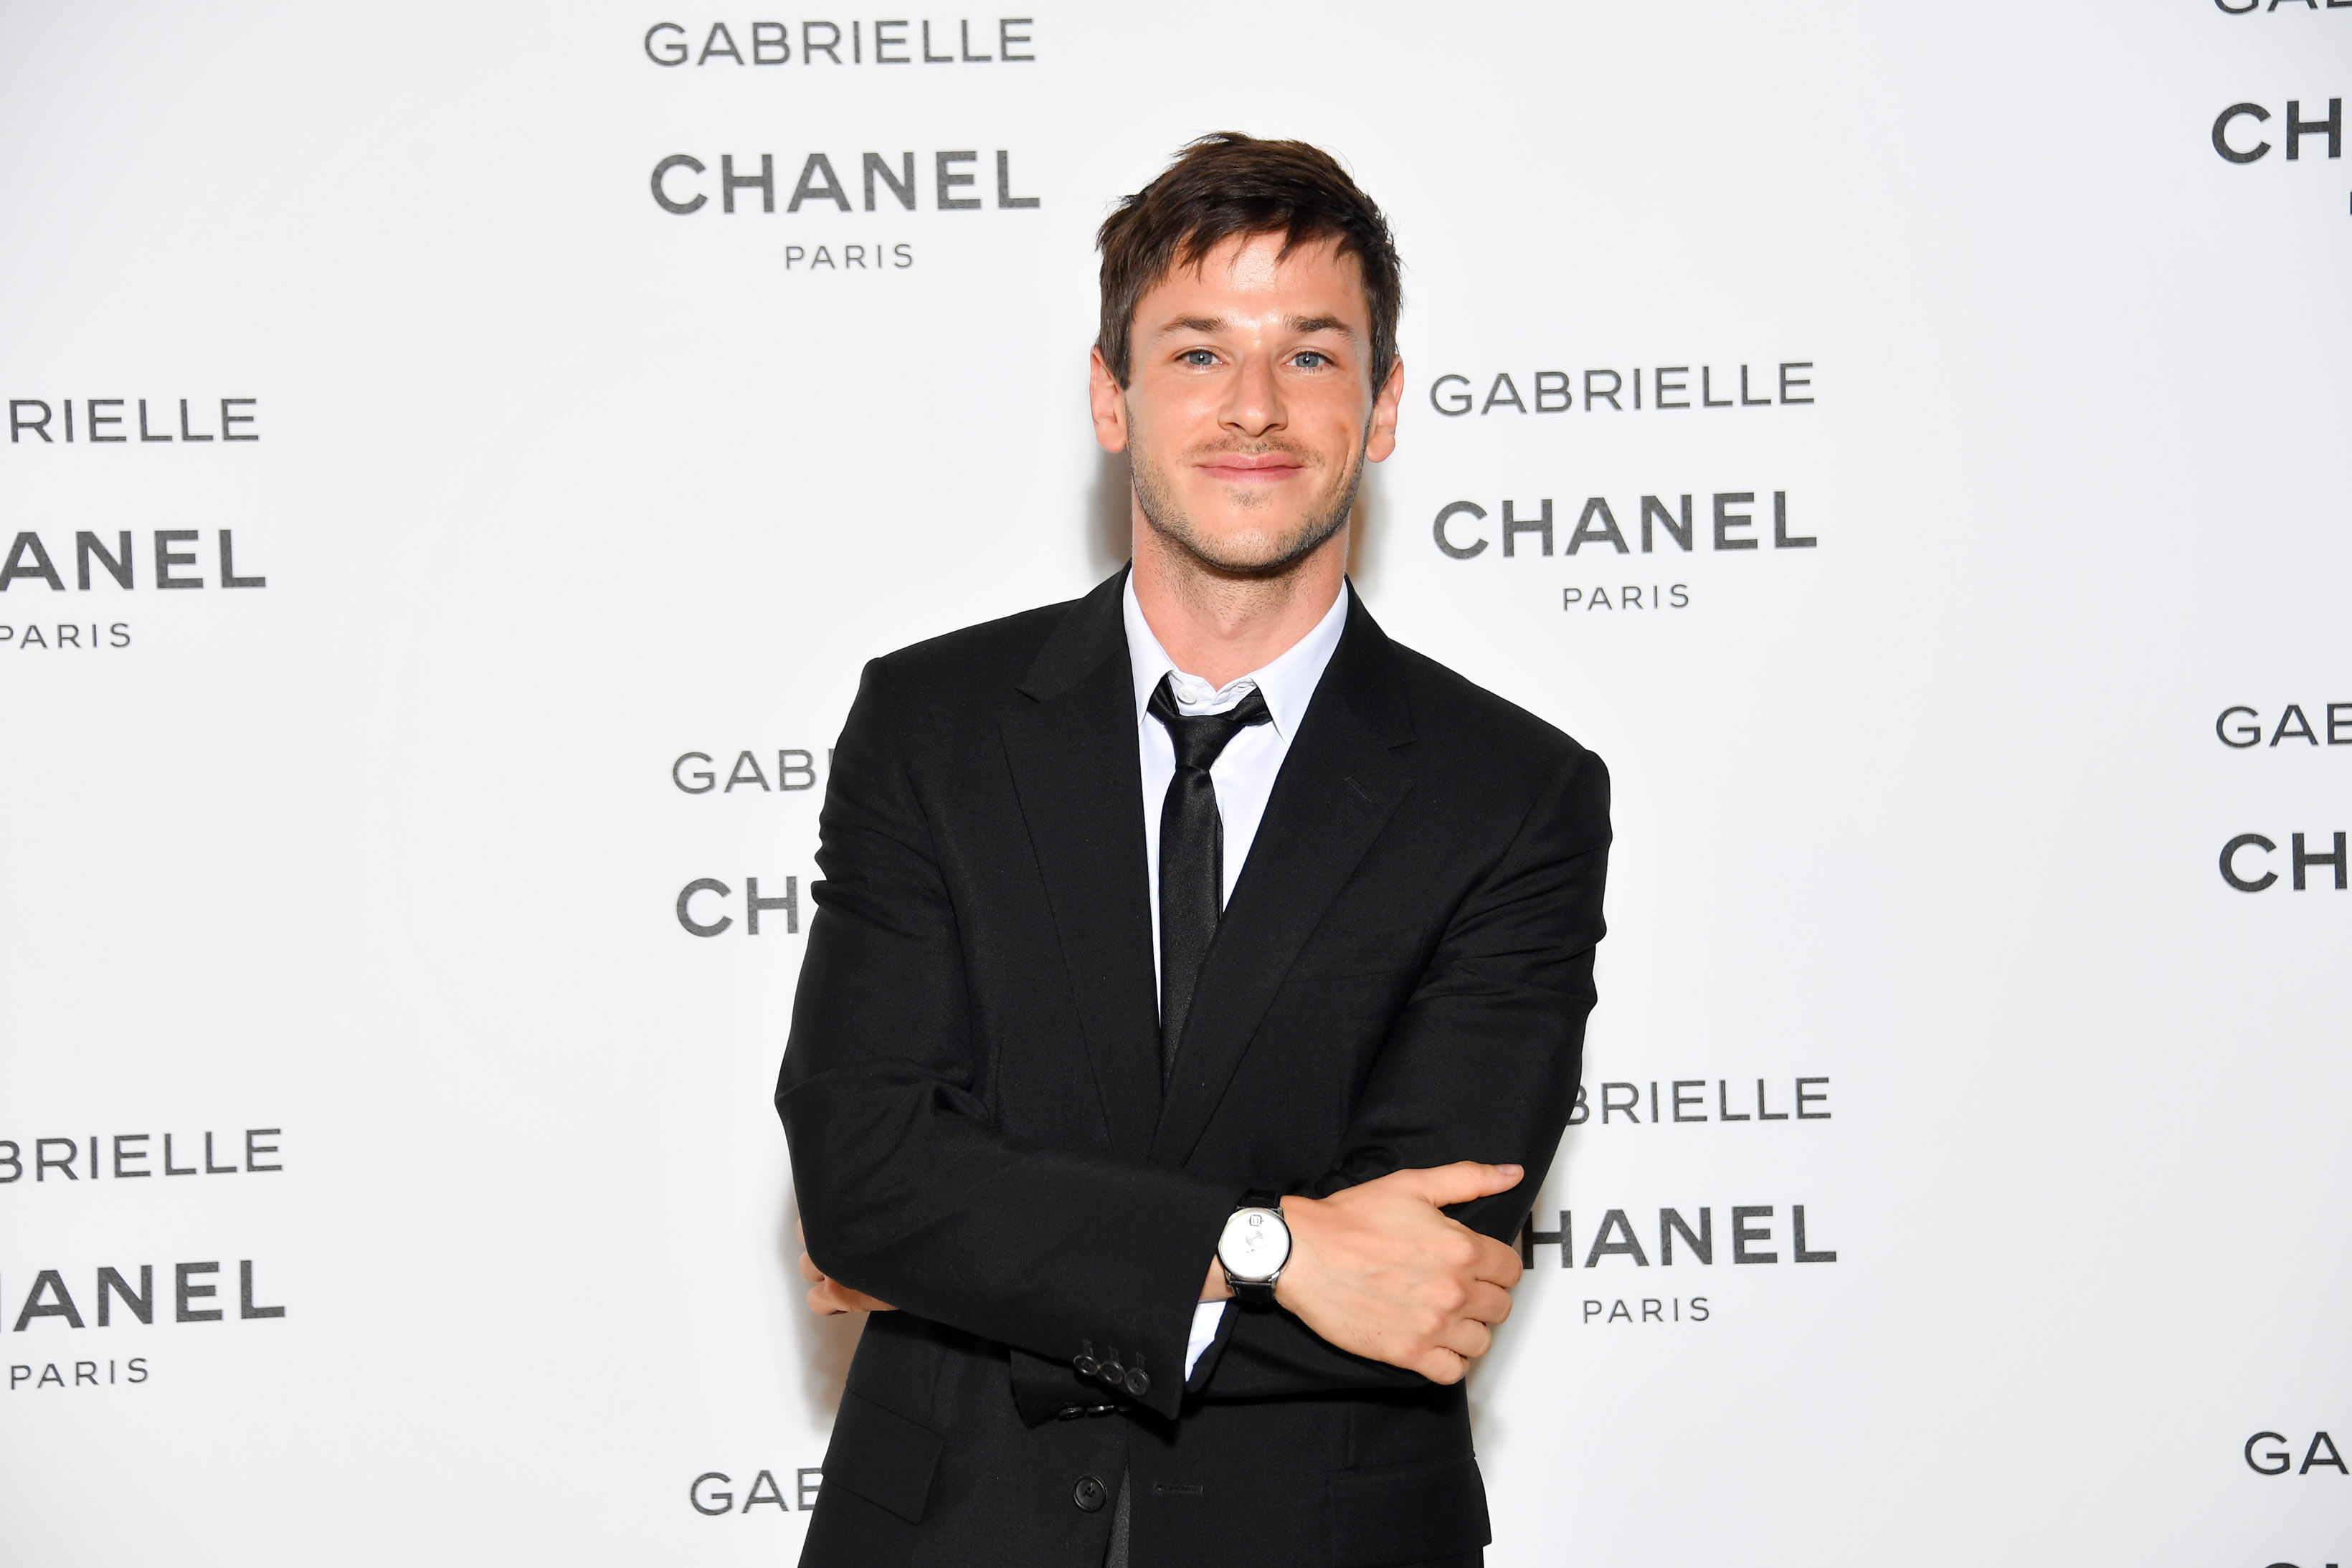 'Moon Knight' star Gaspard Ulliel wears a black suit over a white button-up shirt and black tie.